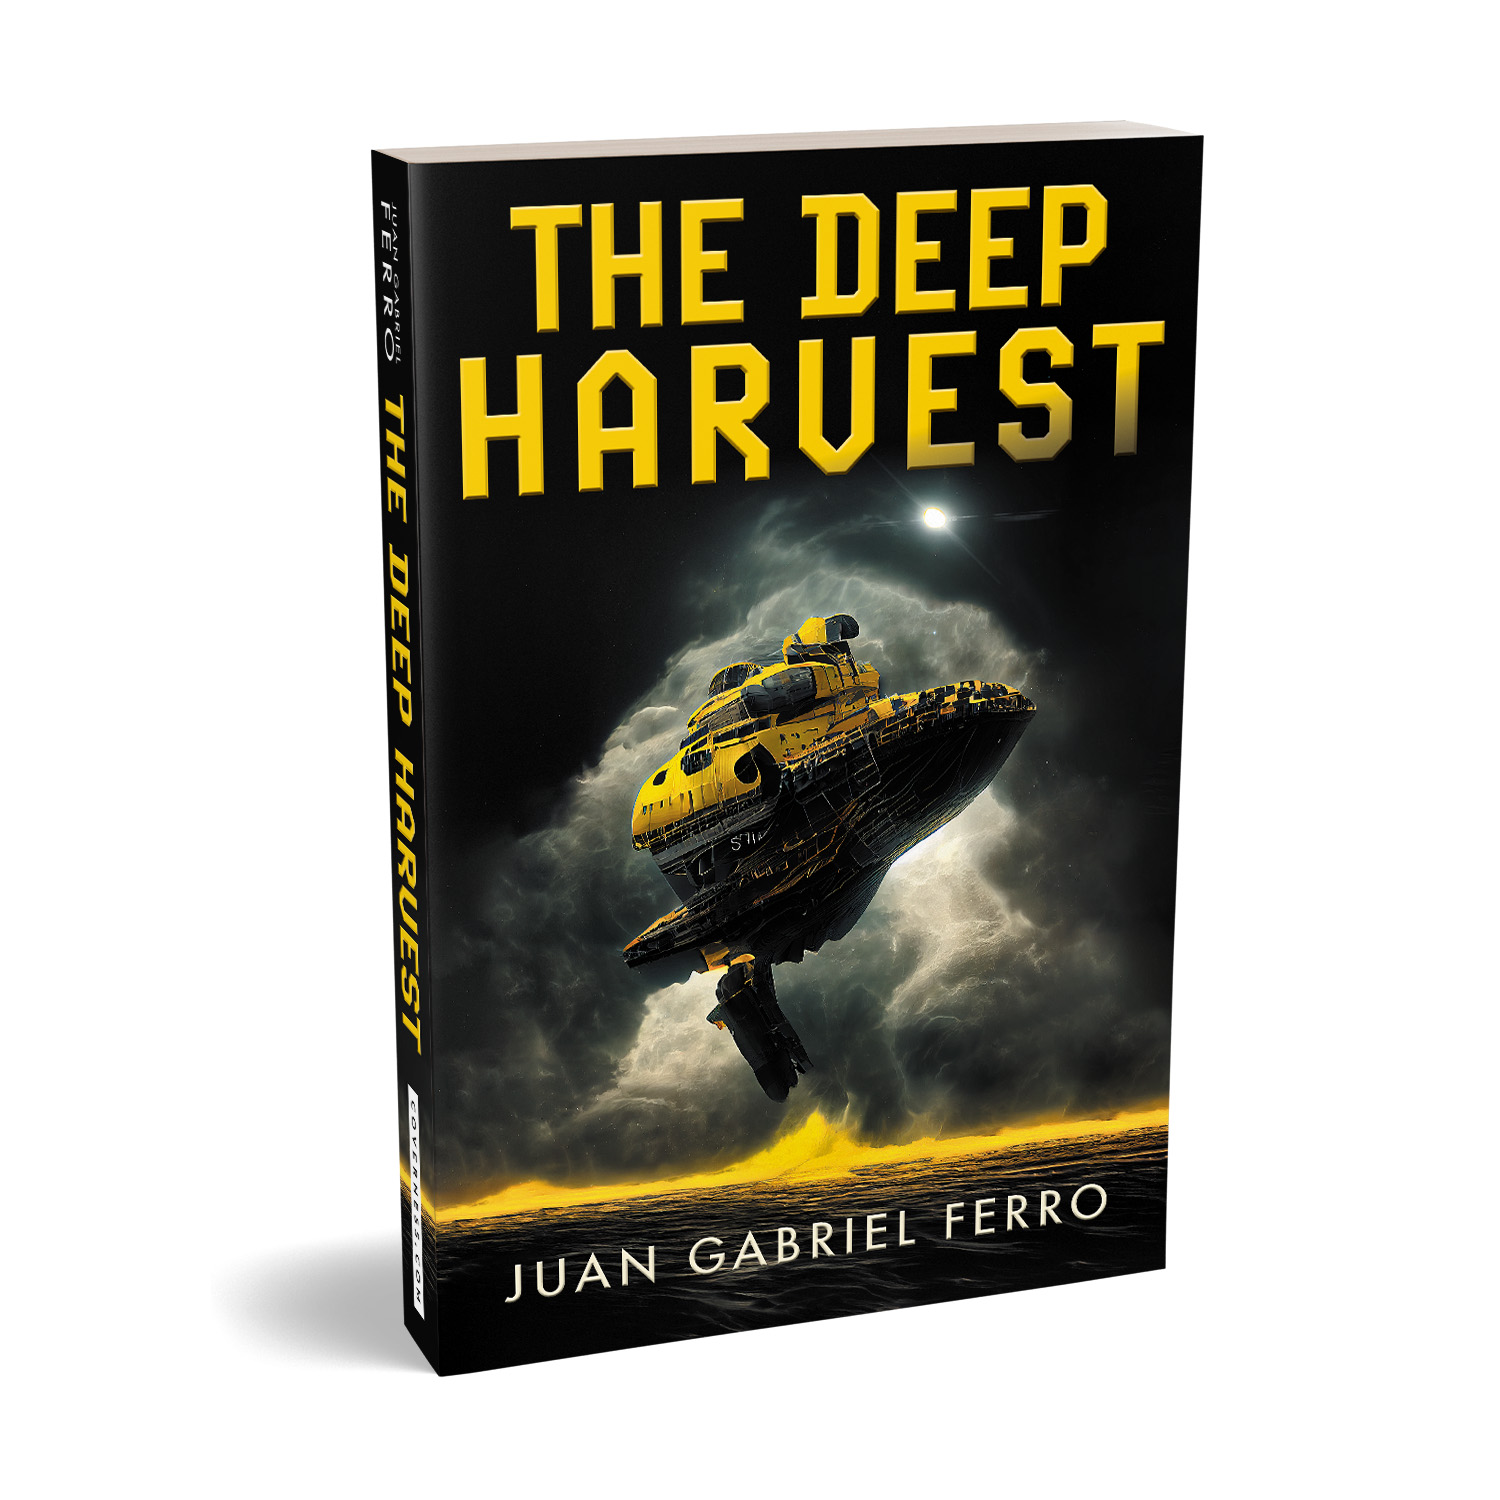 'The Deep Harvest' is a striking scifi demonstration book cover design by Mark Thomas. To learn more about what Mark could do for your book, please visit coverness.com.